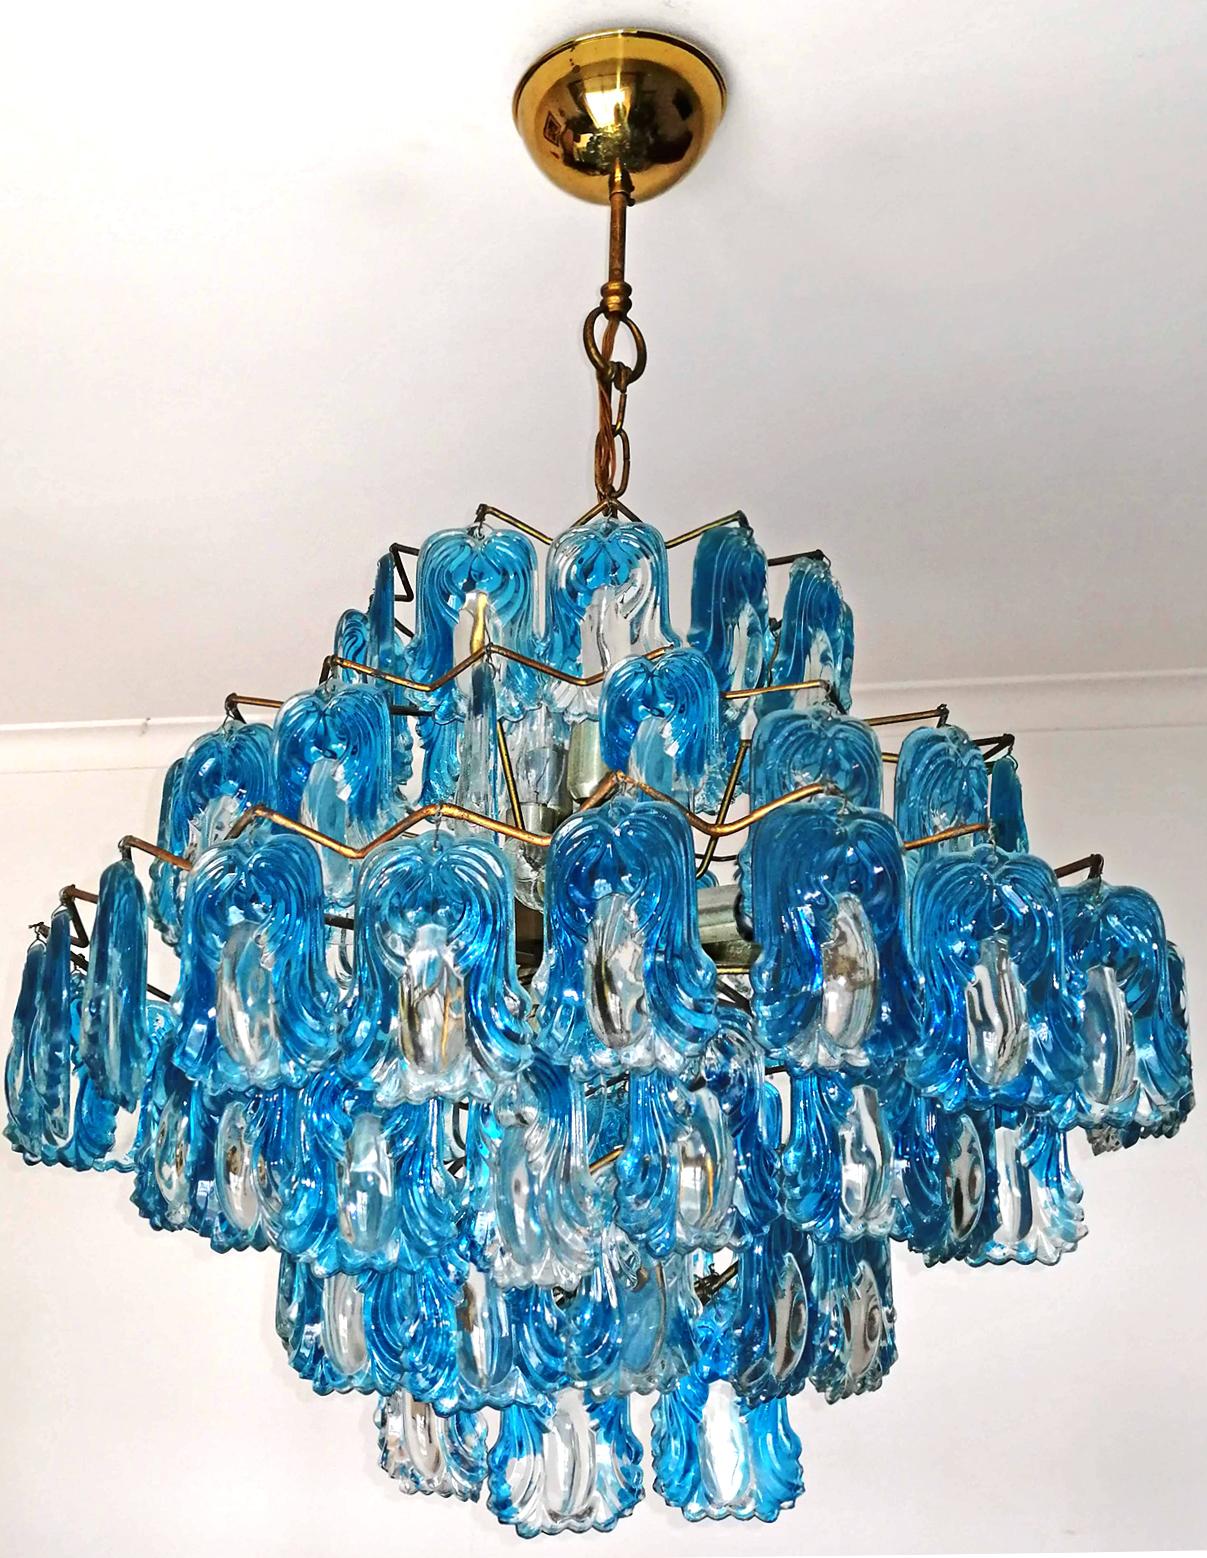 Gorgeous Italian chandelier with 6 layers of turquoise blue glass
Measures:
Diameter 25.6 in / 65 cm
Height 31.5 in (chain 6 in) / 80 cm (chain 15cm)
Weight: 33 lb /15 kg
15-light bulbs E 14/ good working condition/
Assembly required. Bulbs not